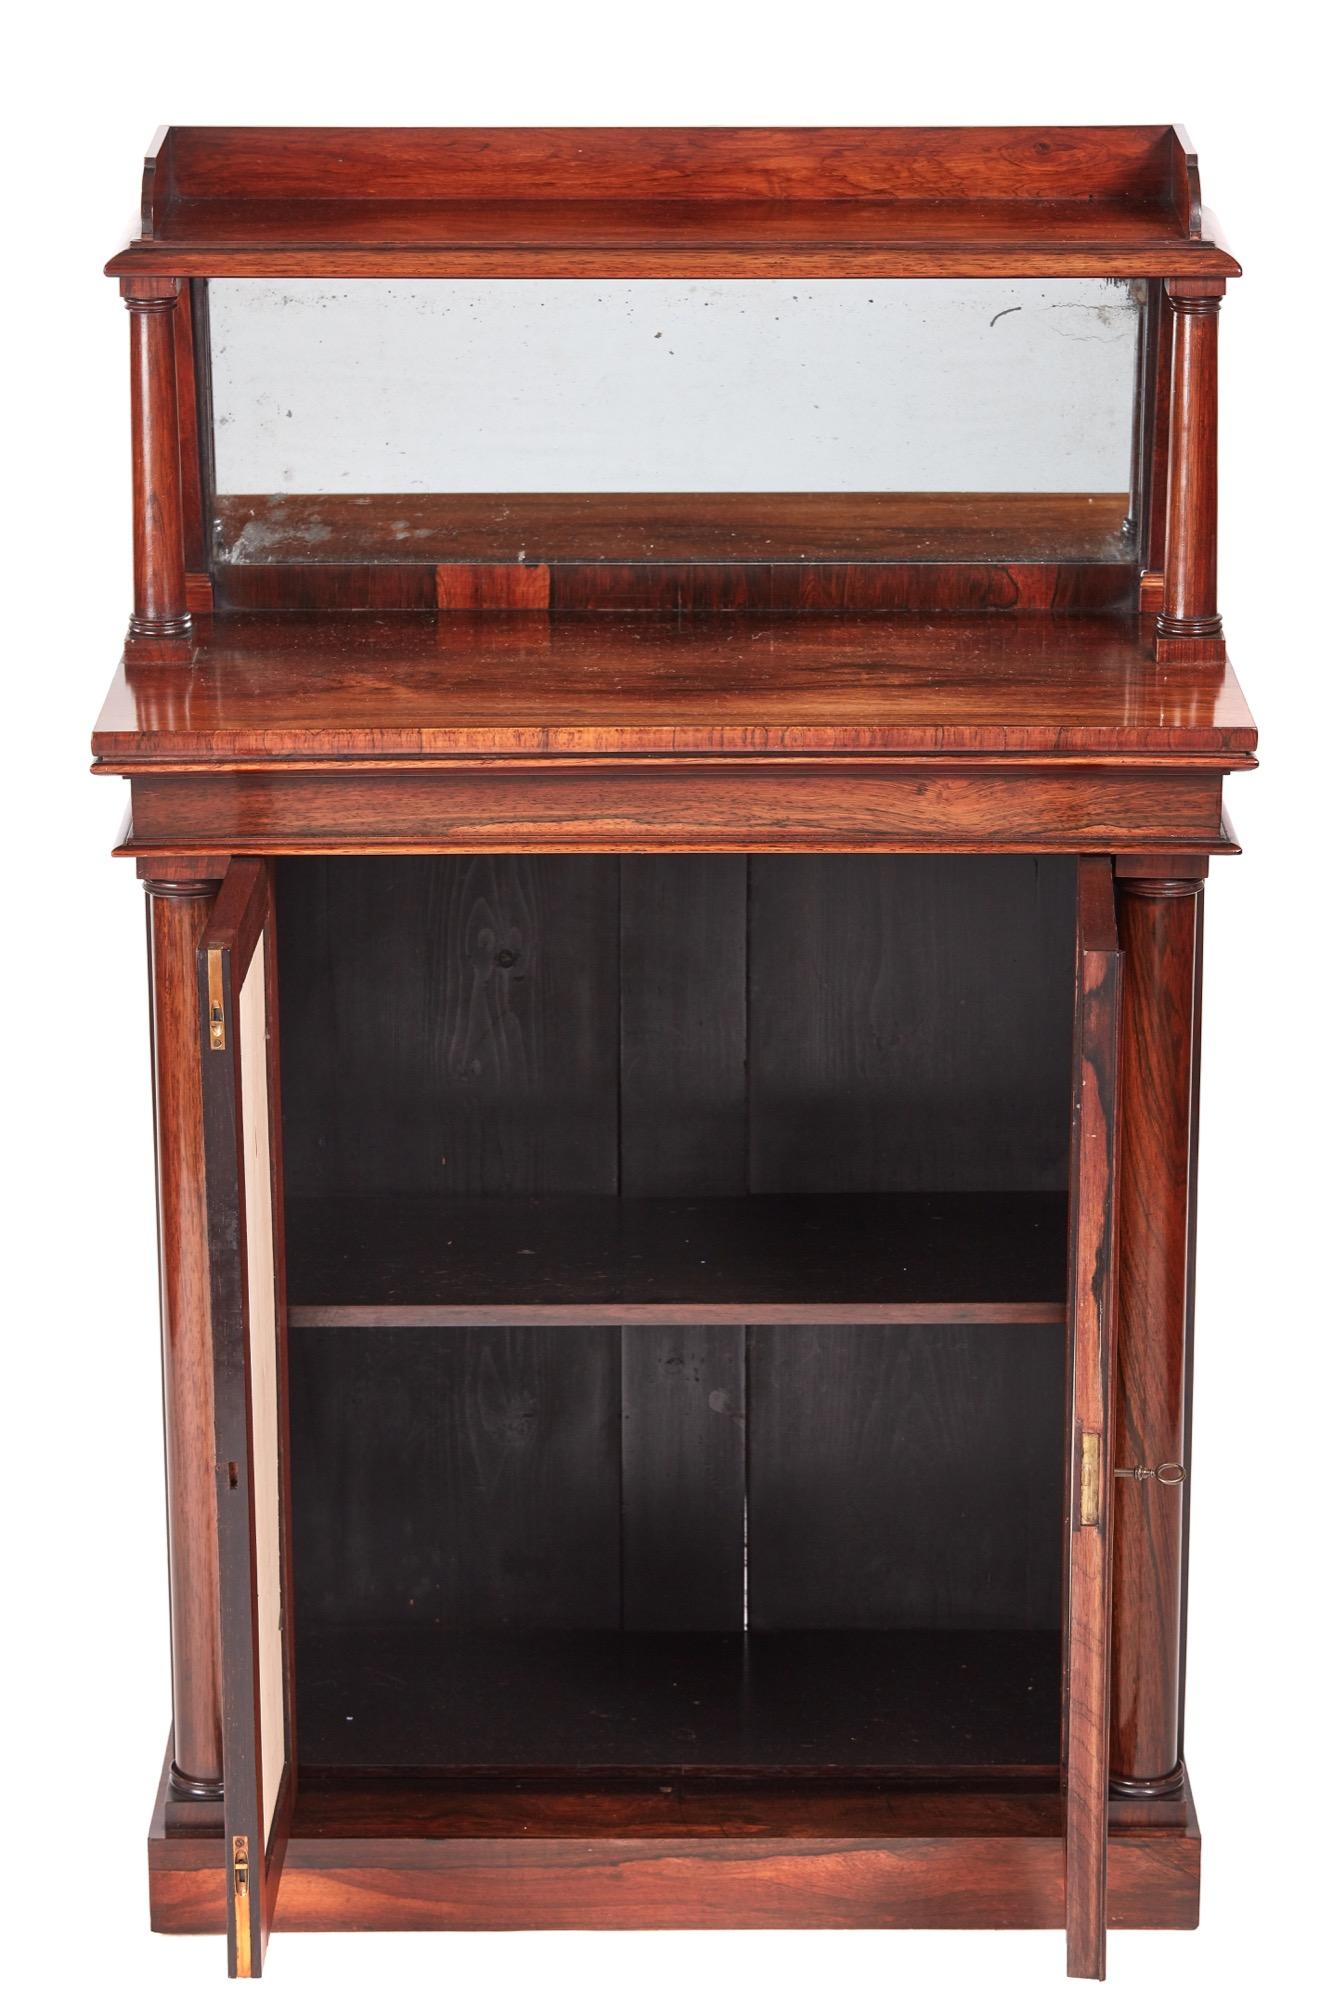 Small quality antique William IV rosewood chiffonier with a rosewood mirror back. It is supported by two solid rosewood columns and has a delightful quality rosewood top. Two mirrored doors with one shelf interior and two elegant solid rosewood